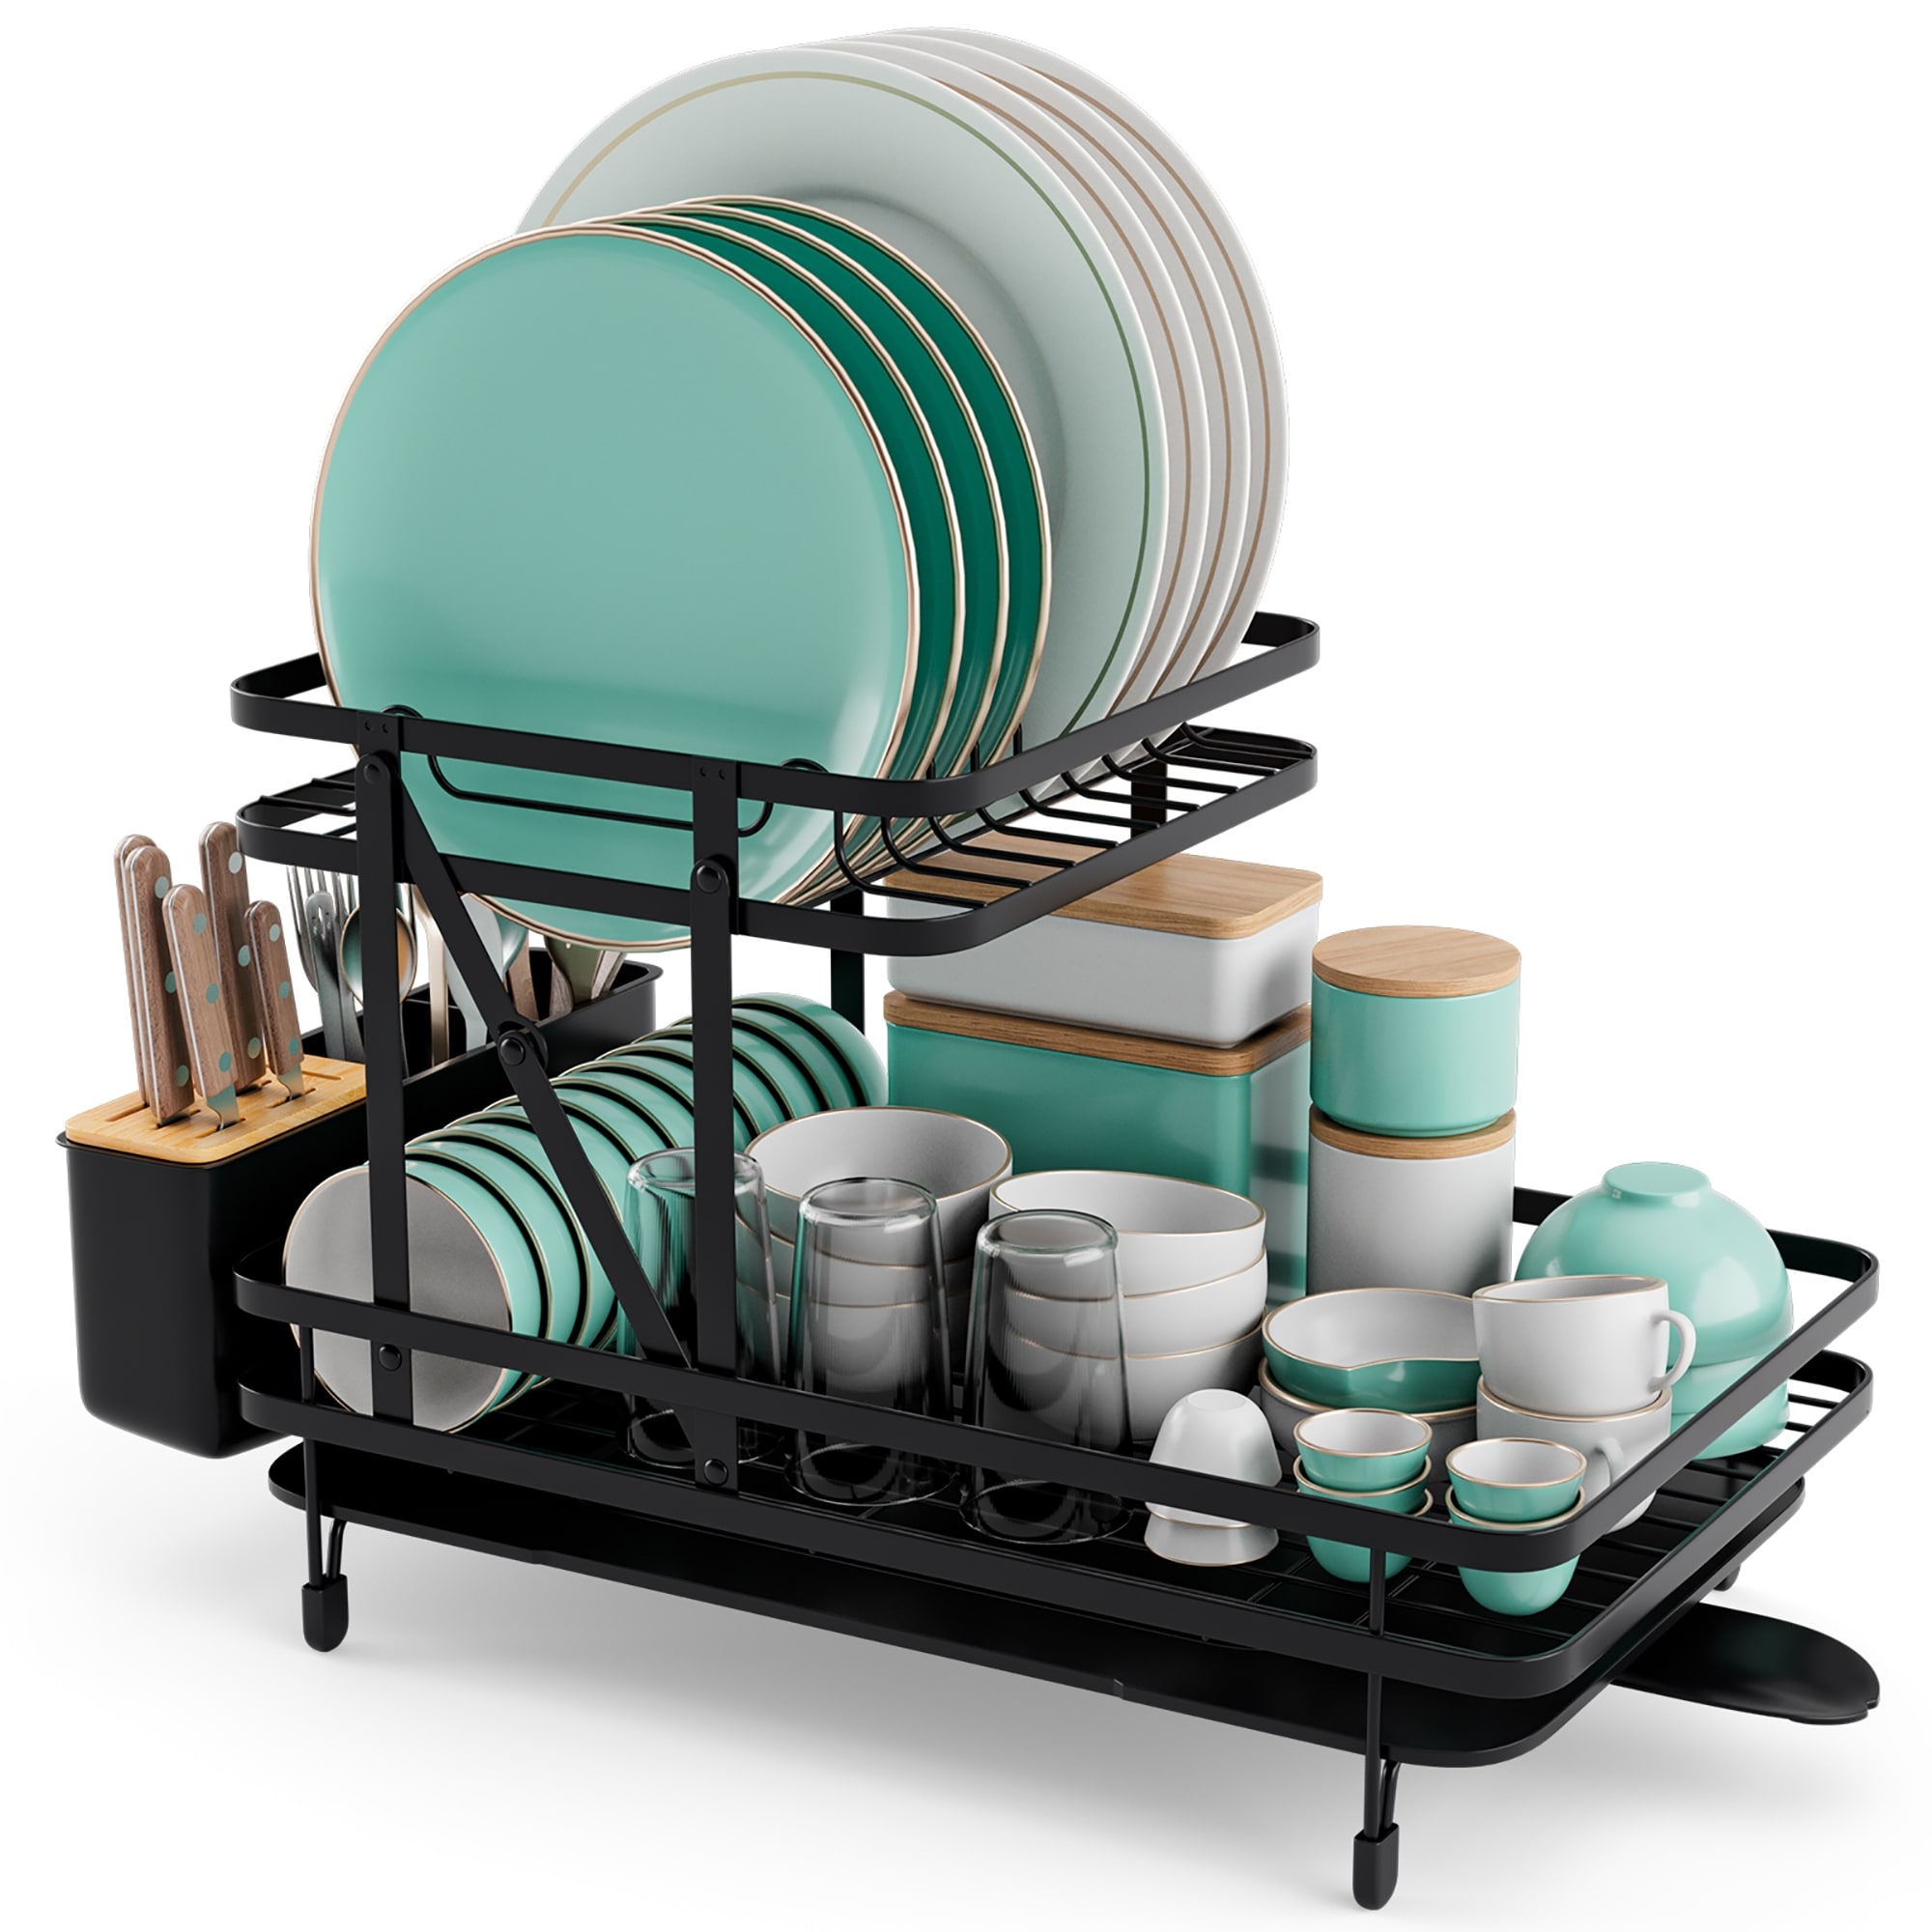 JASIWAY 2 Tier Kitchen Stainless Steel Dish Rack with Cutlery Holder and Drainboard - Black